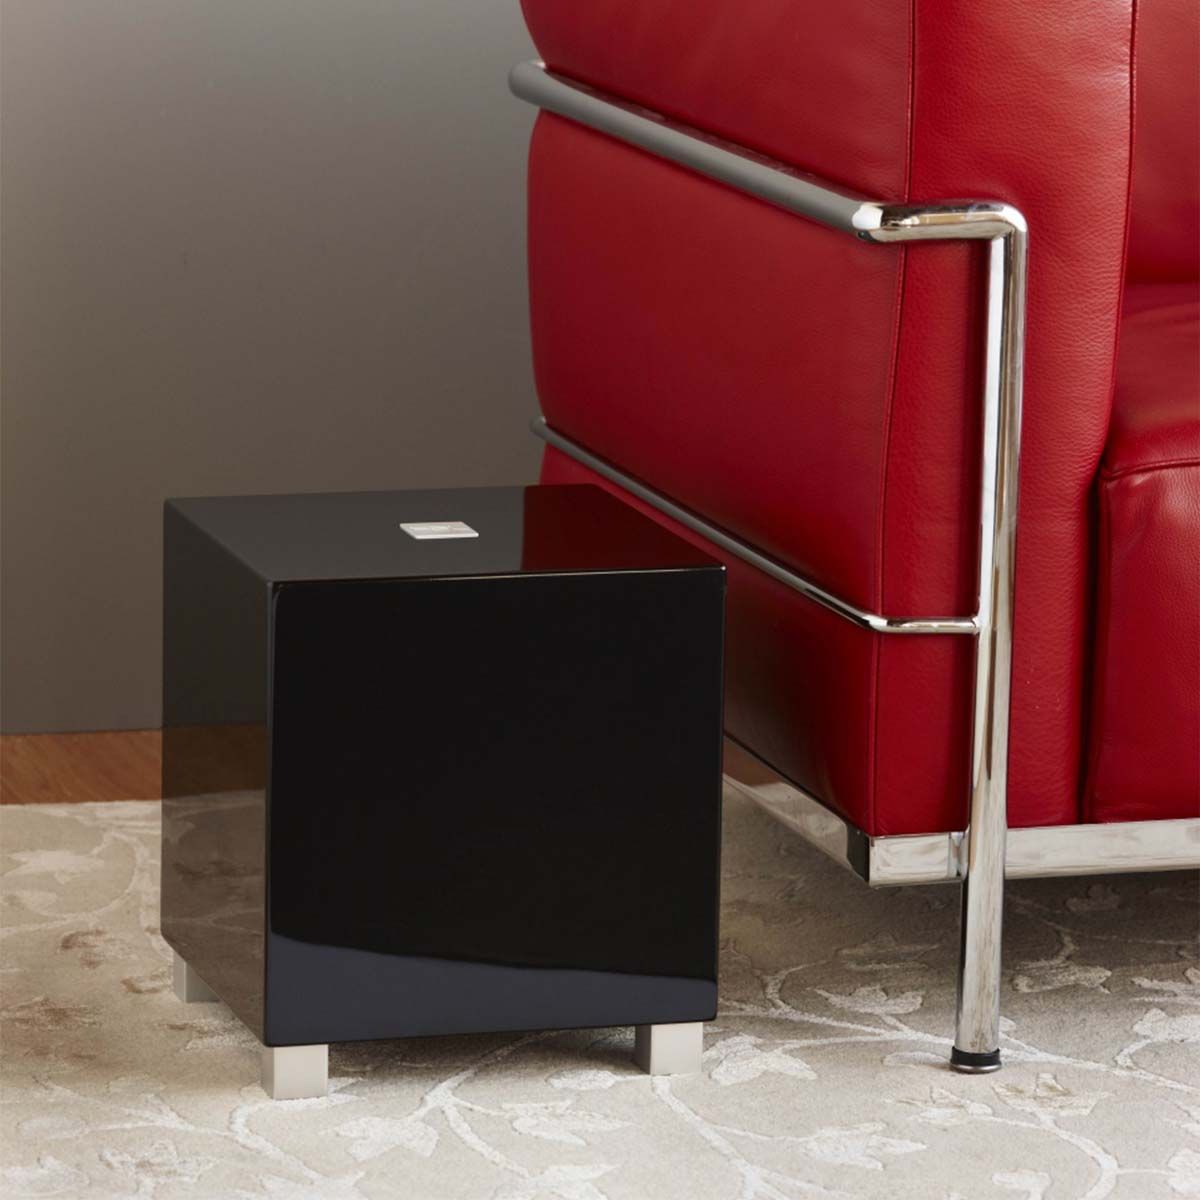 REL Acoustics Tzero MKIII Subwoofer, Black, in a living space beside a red leather couch